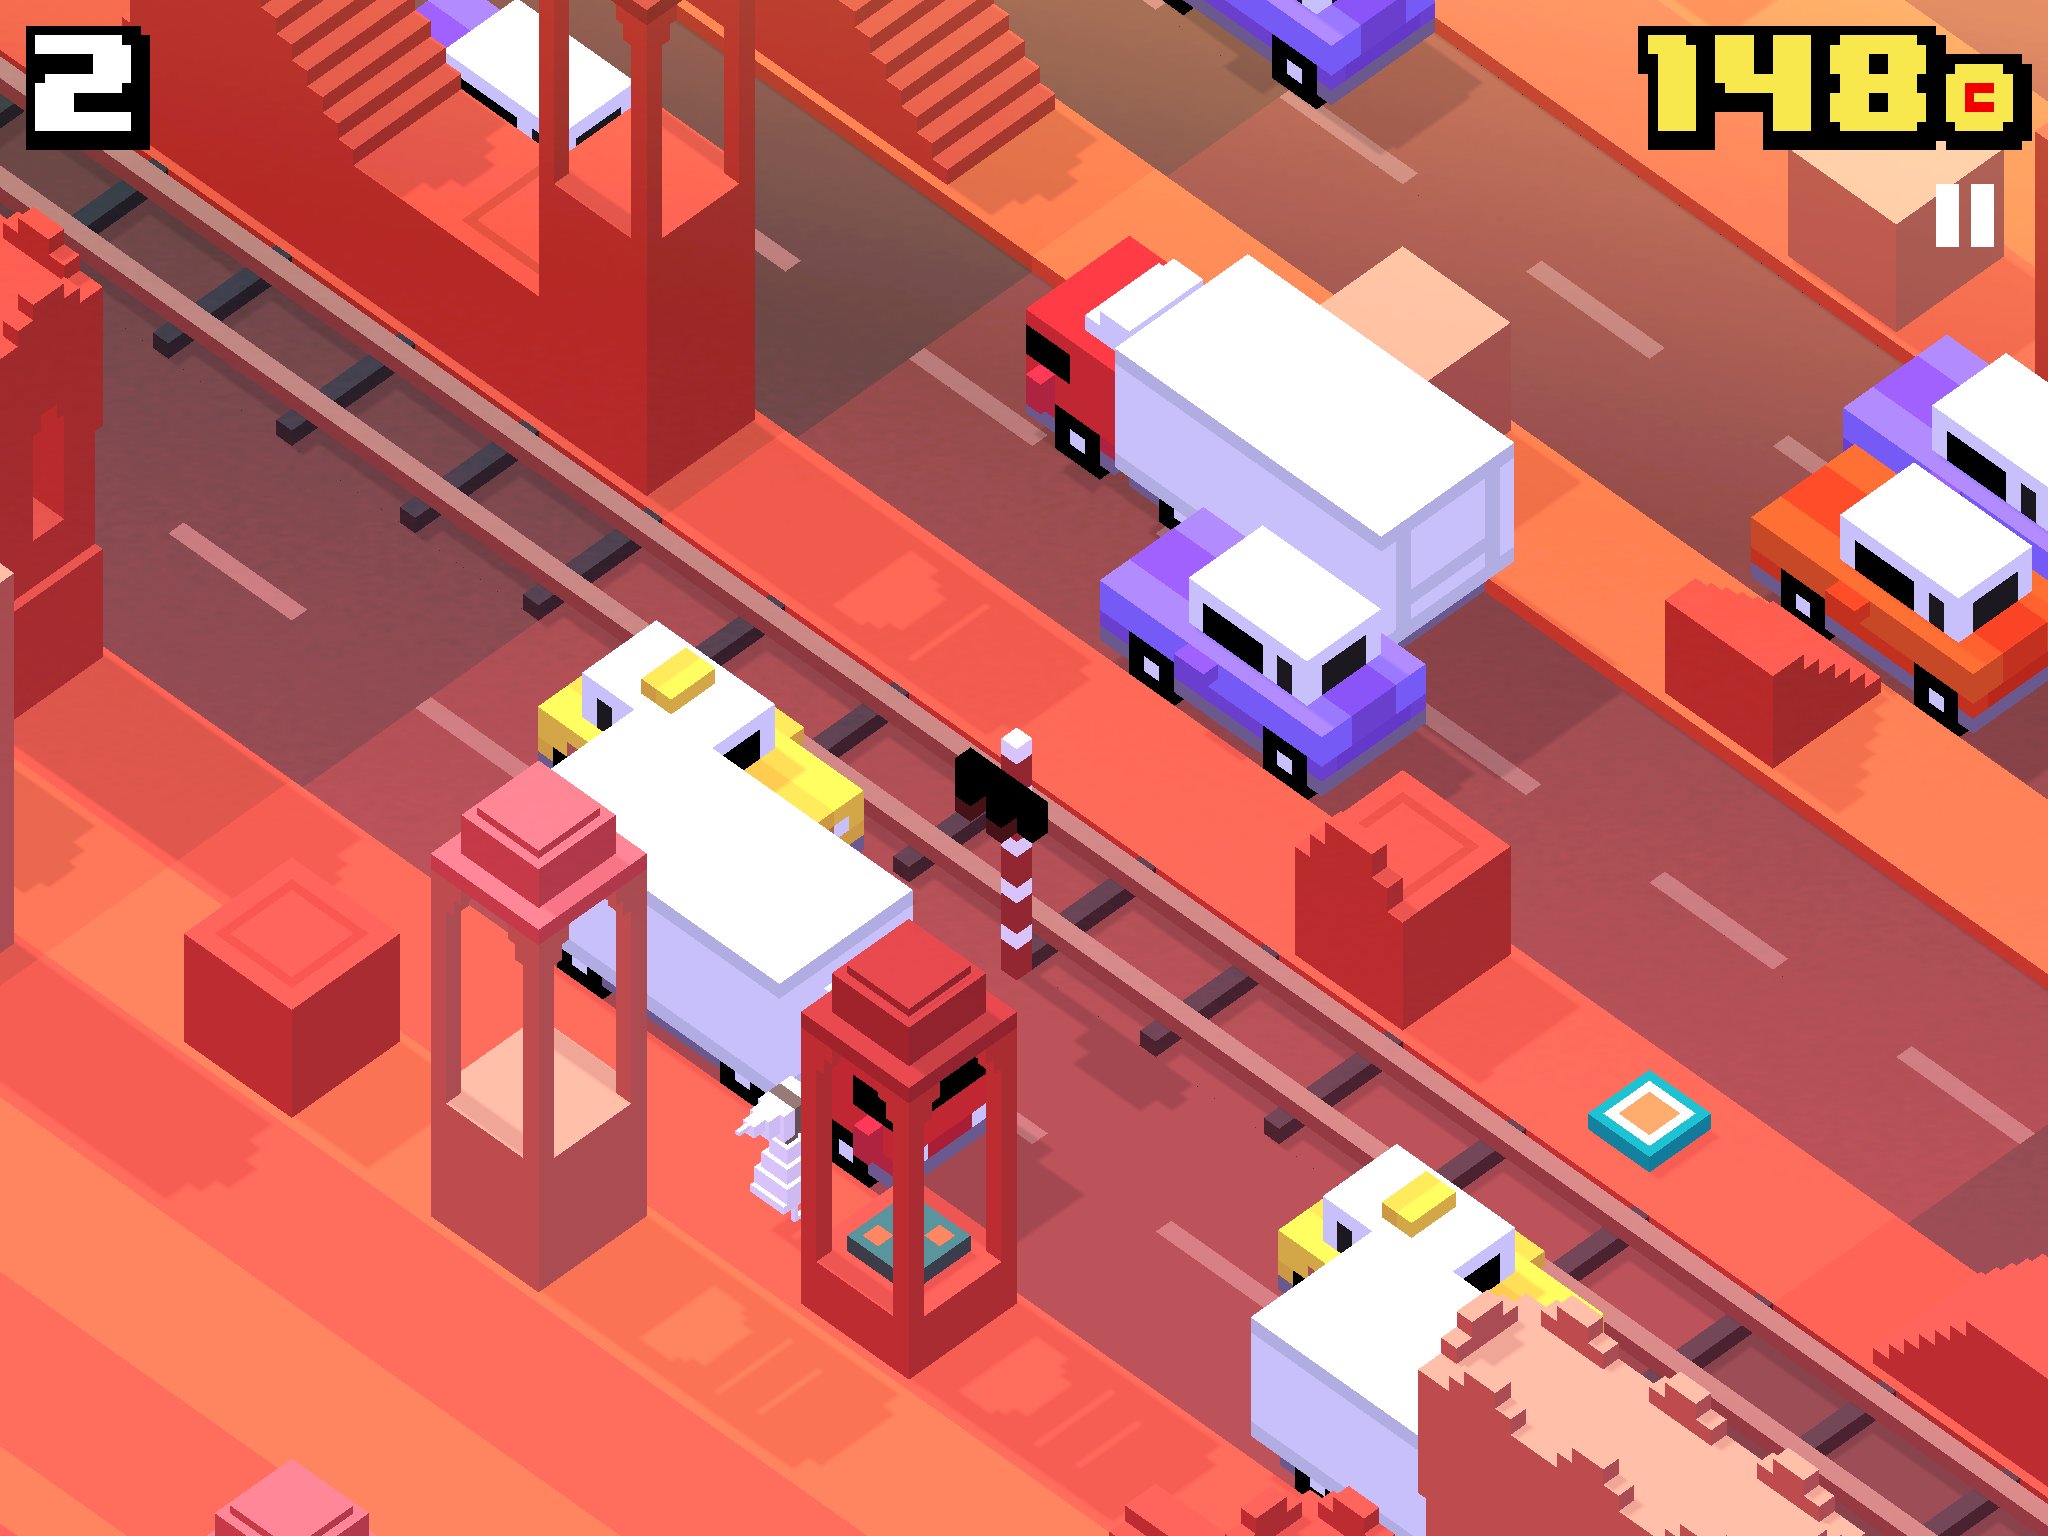 how to get all the secret characters in crossy road